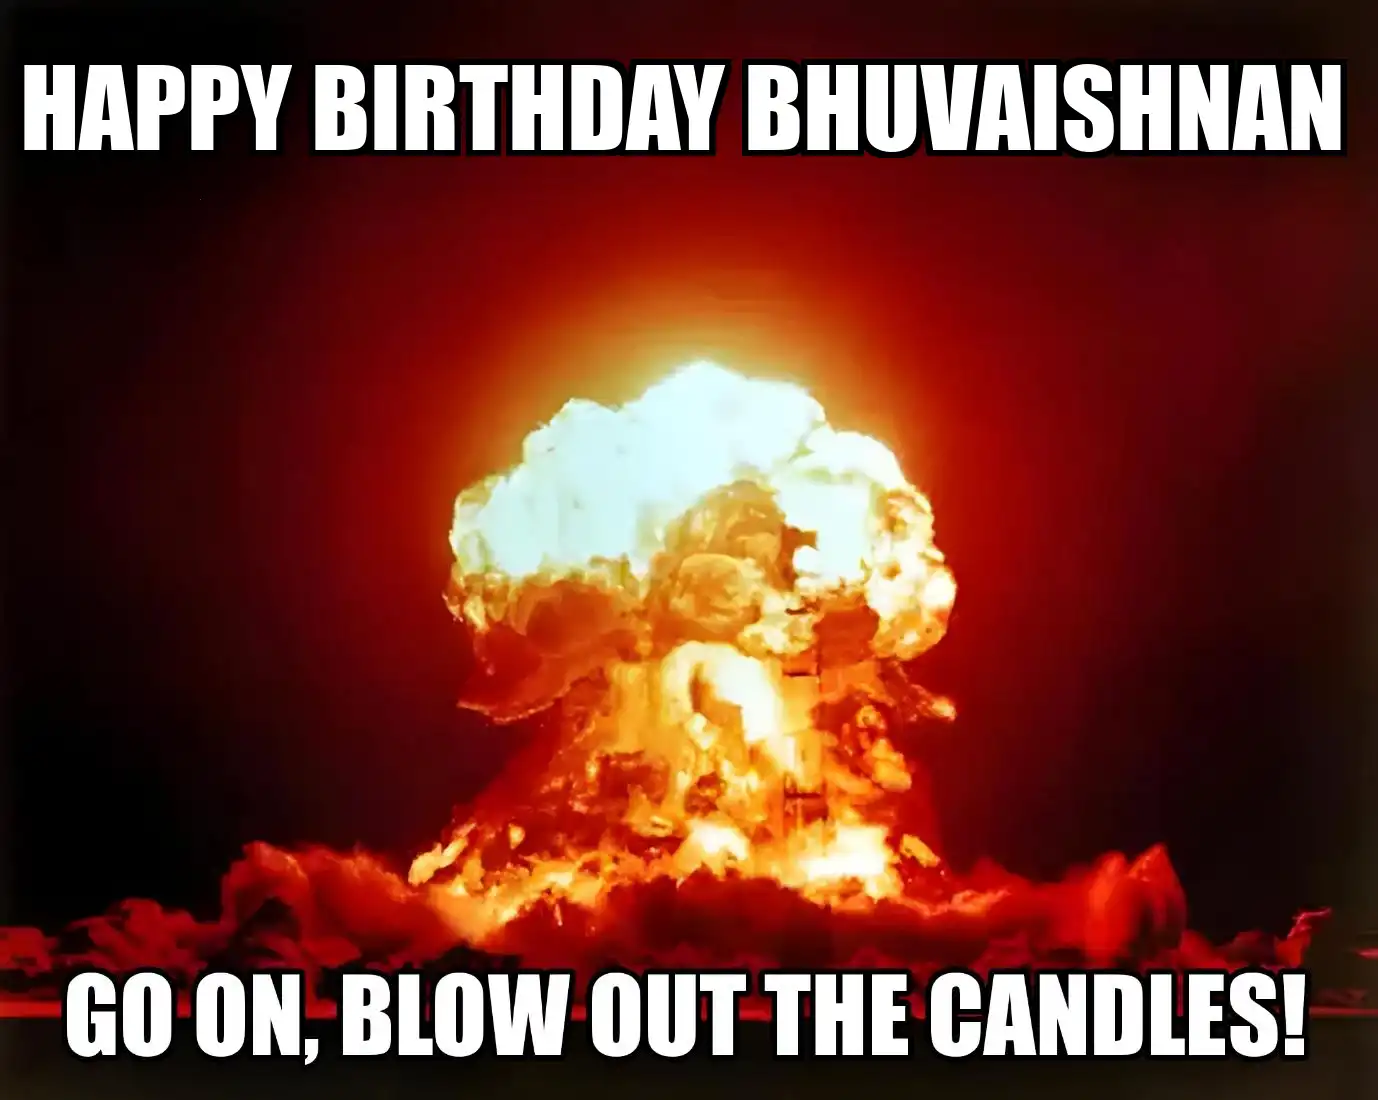 Happy Birthday Bhuvaishnan Go On Blow Out The Candles Meme